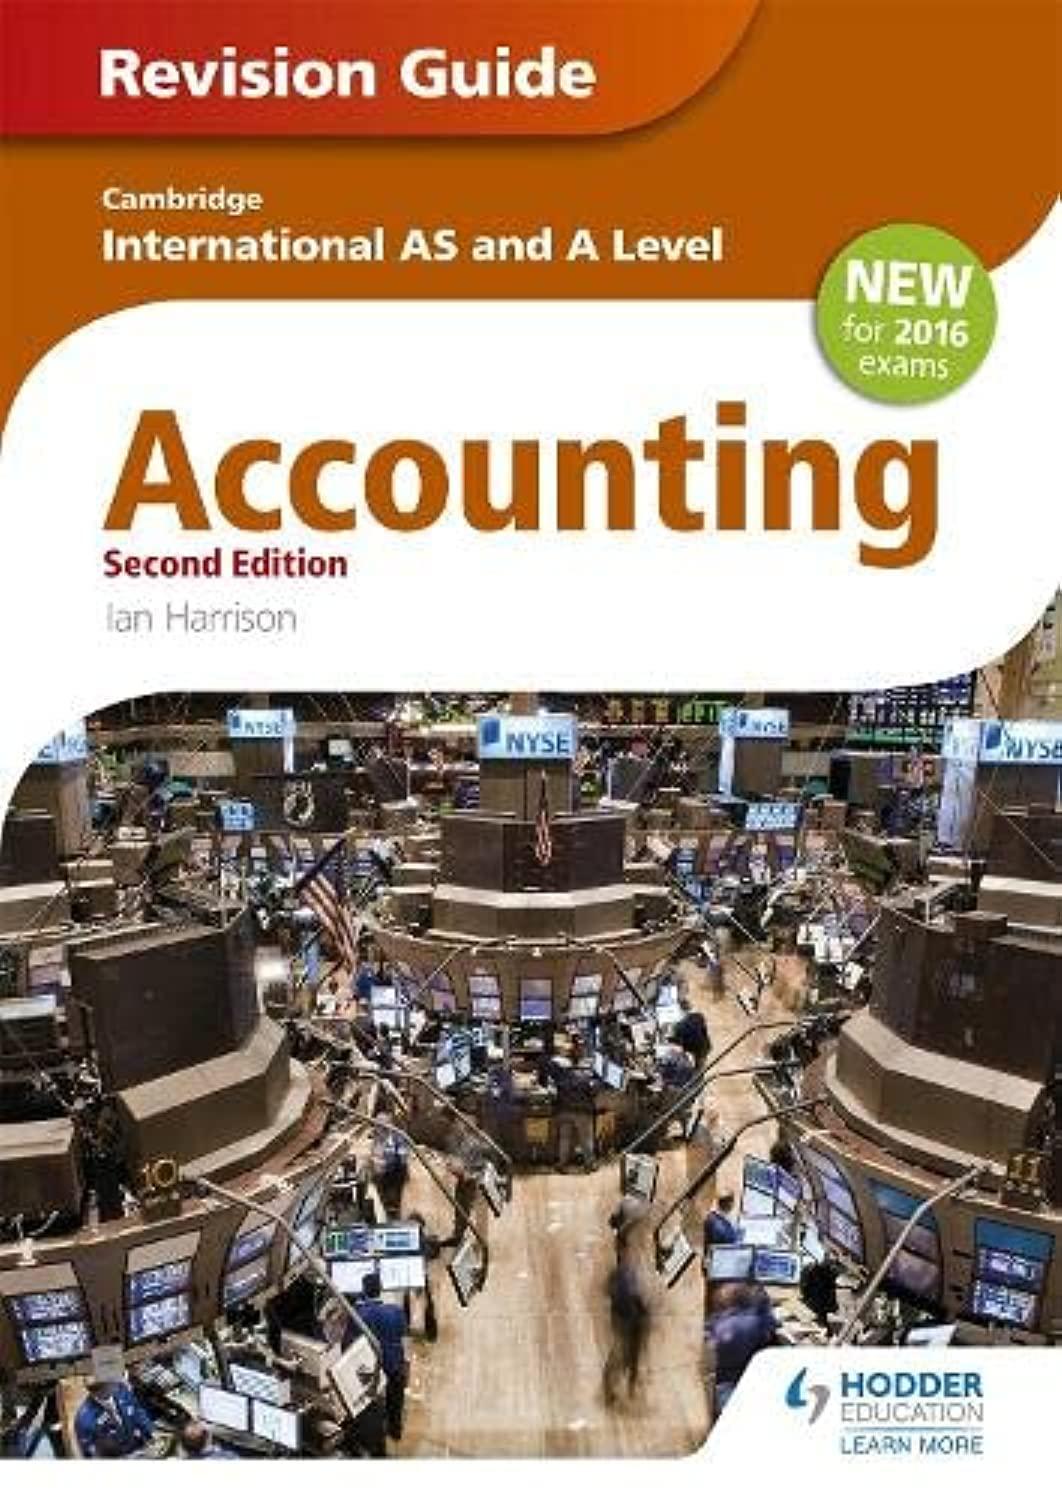 cambridge international as and a level accounting revision guide 2nd edition ian harrison 052172001x,